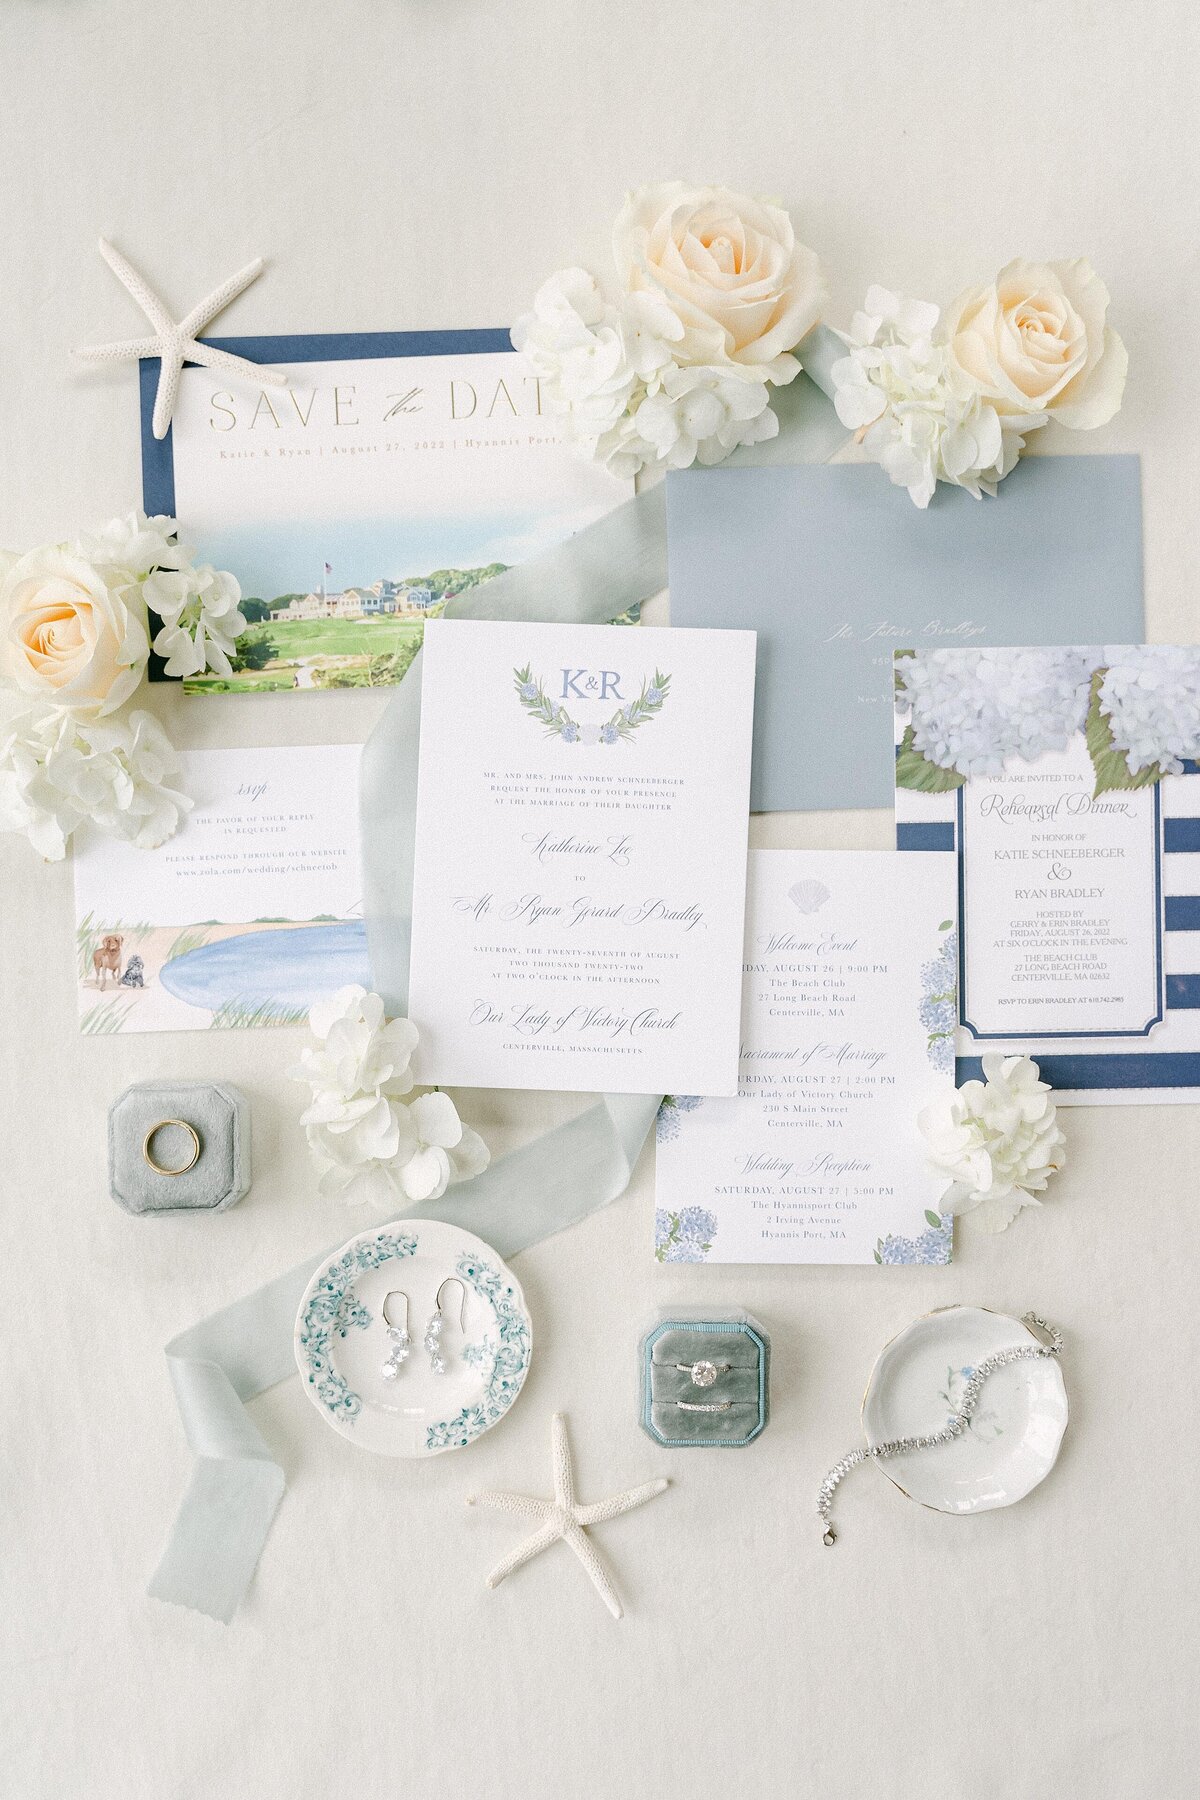 Wedding invitations for a Cape Cod wedding in Hyannis Port